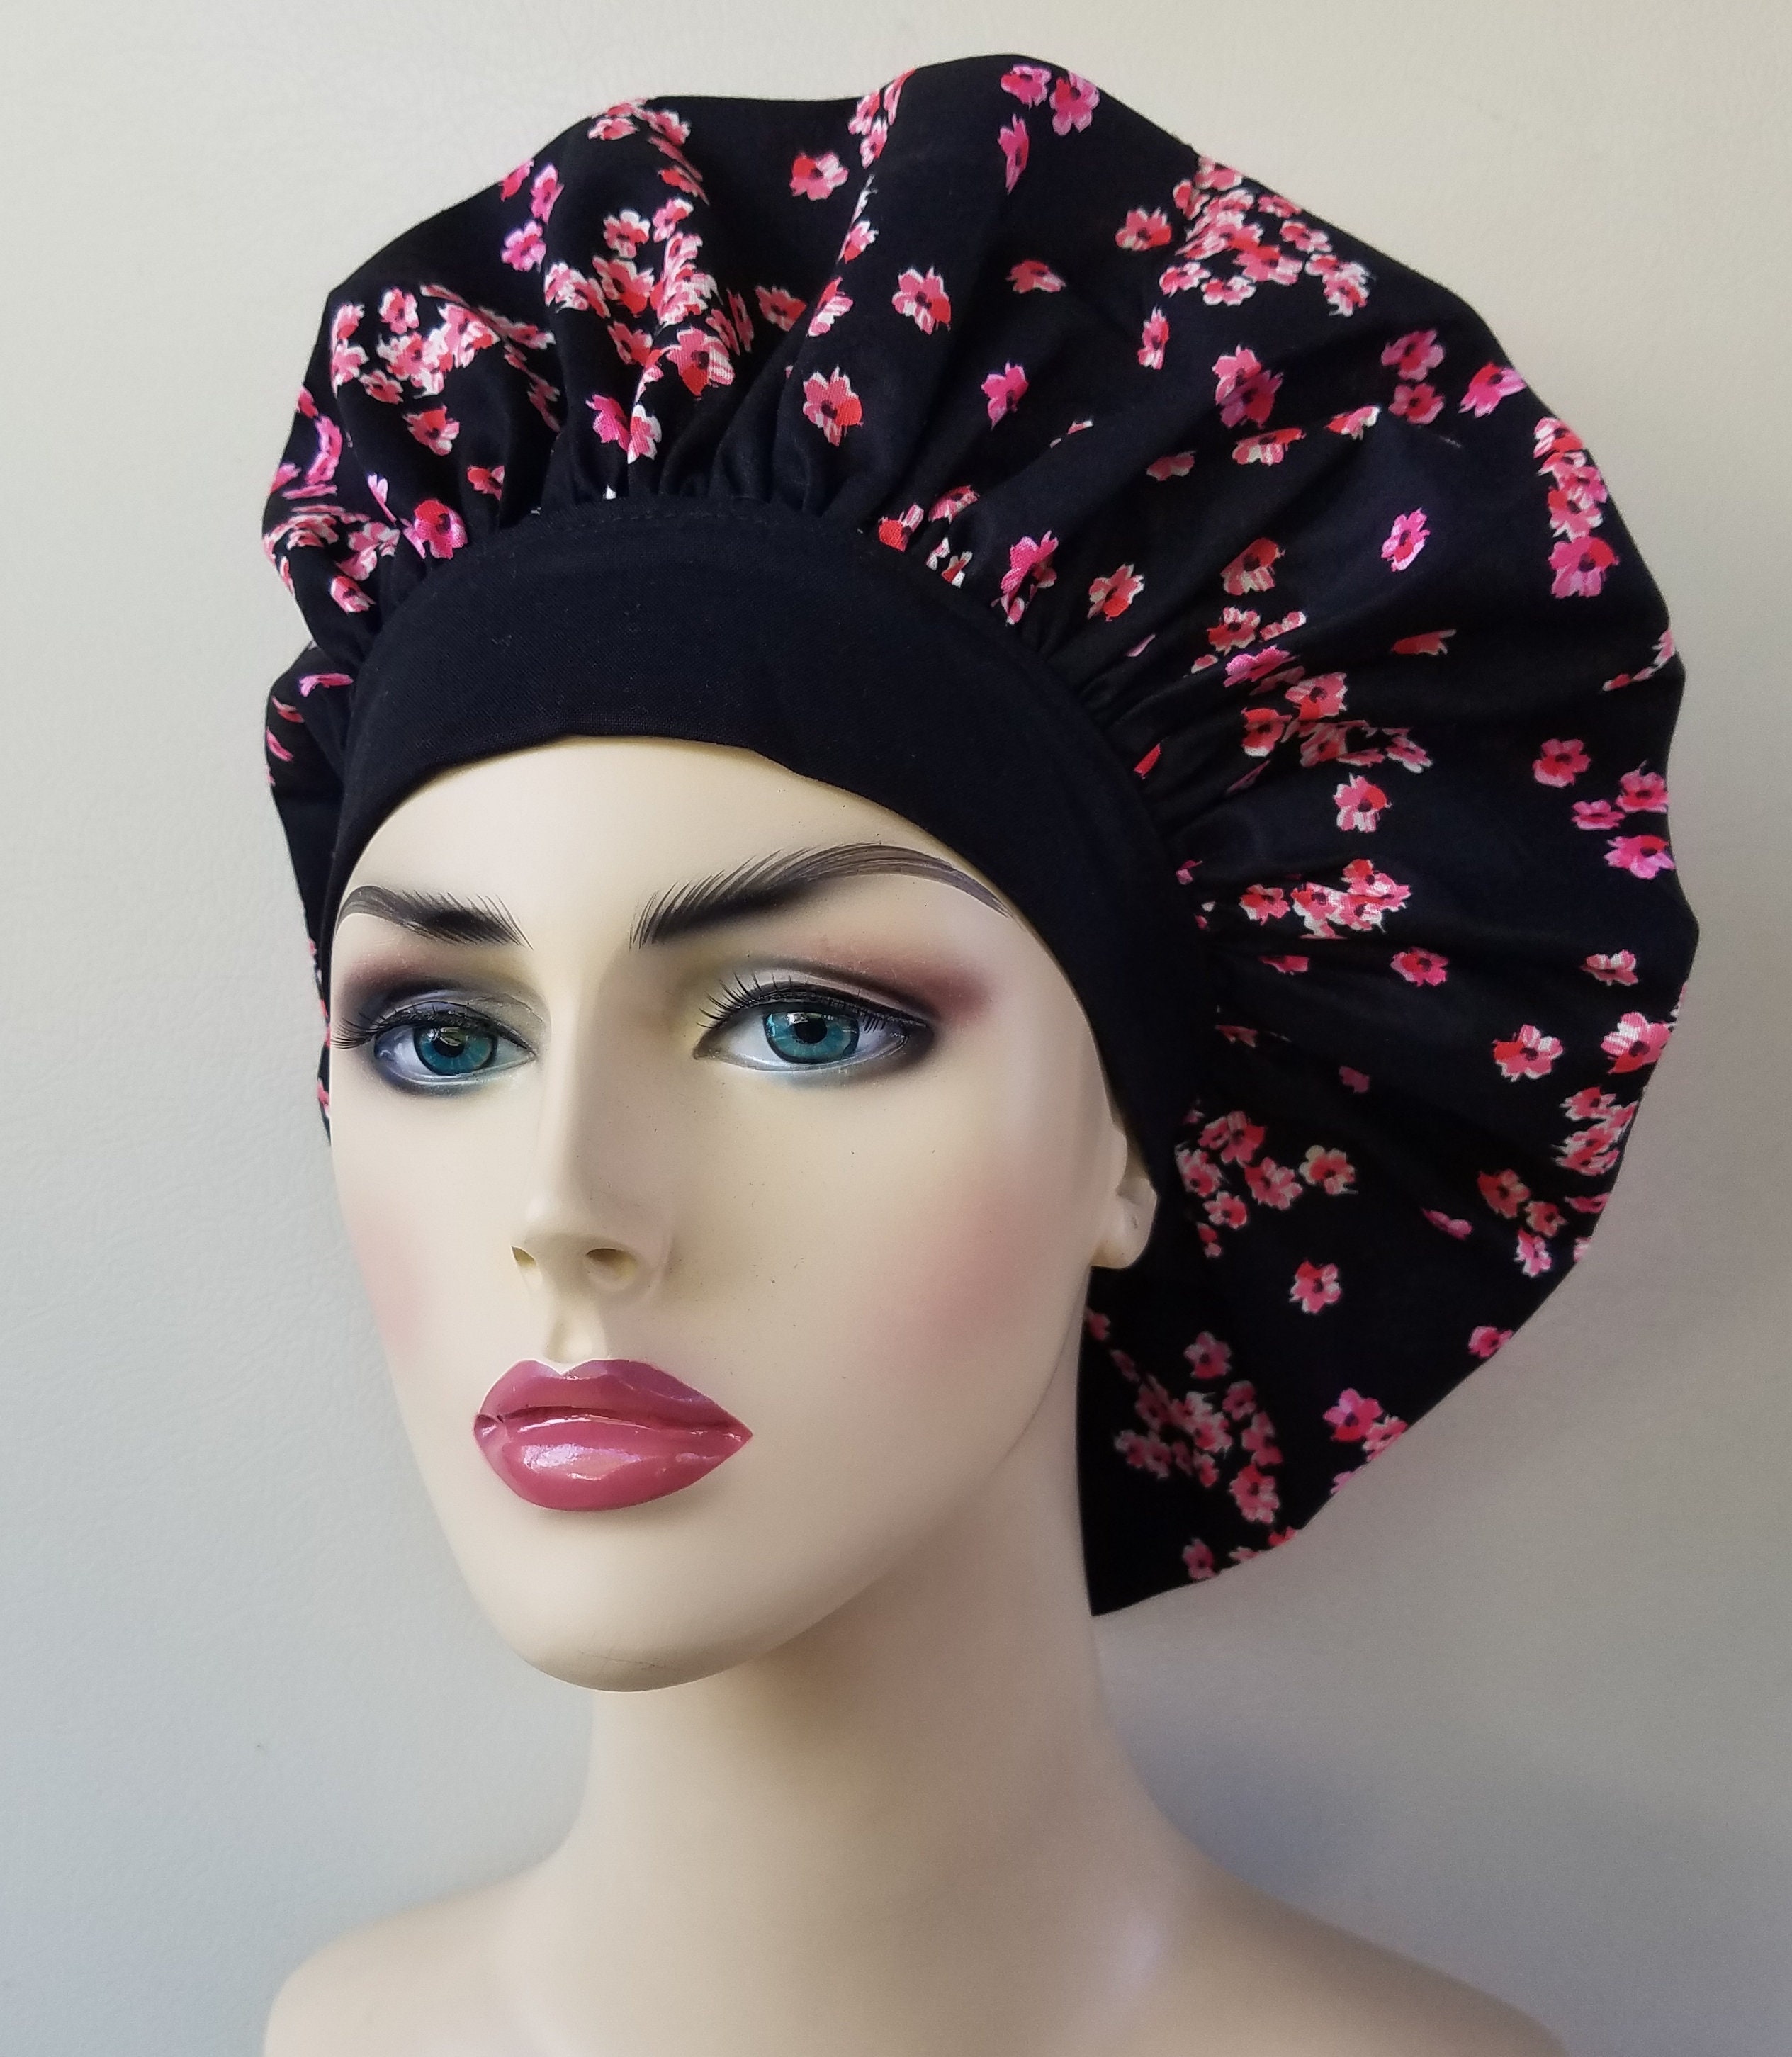 Details about   BOUFFANT STYLE SURGICAL Scrub Hat Cap Circles 